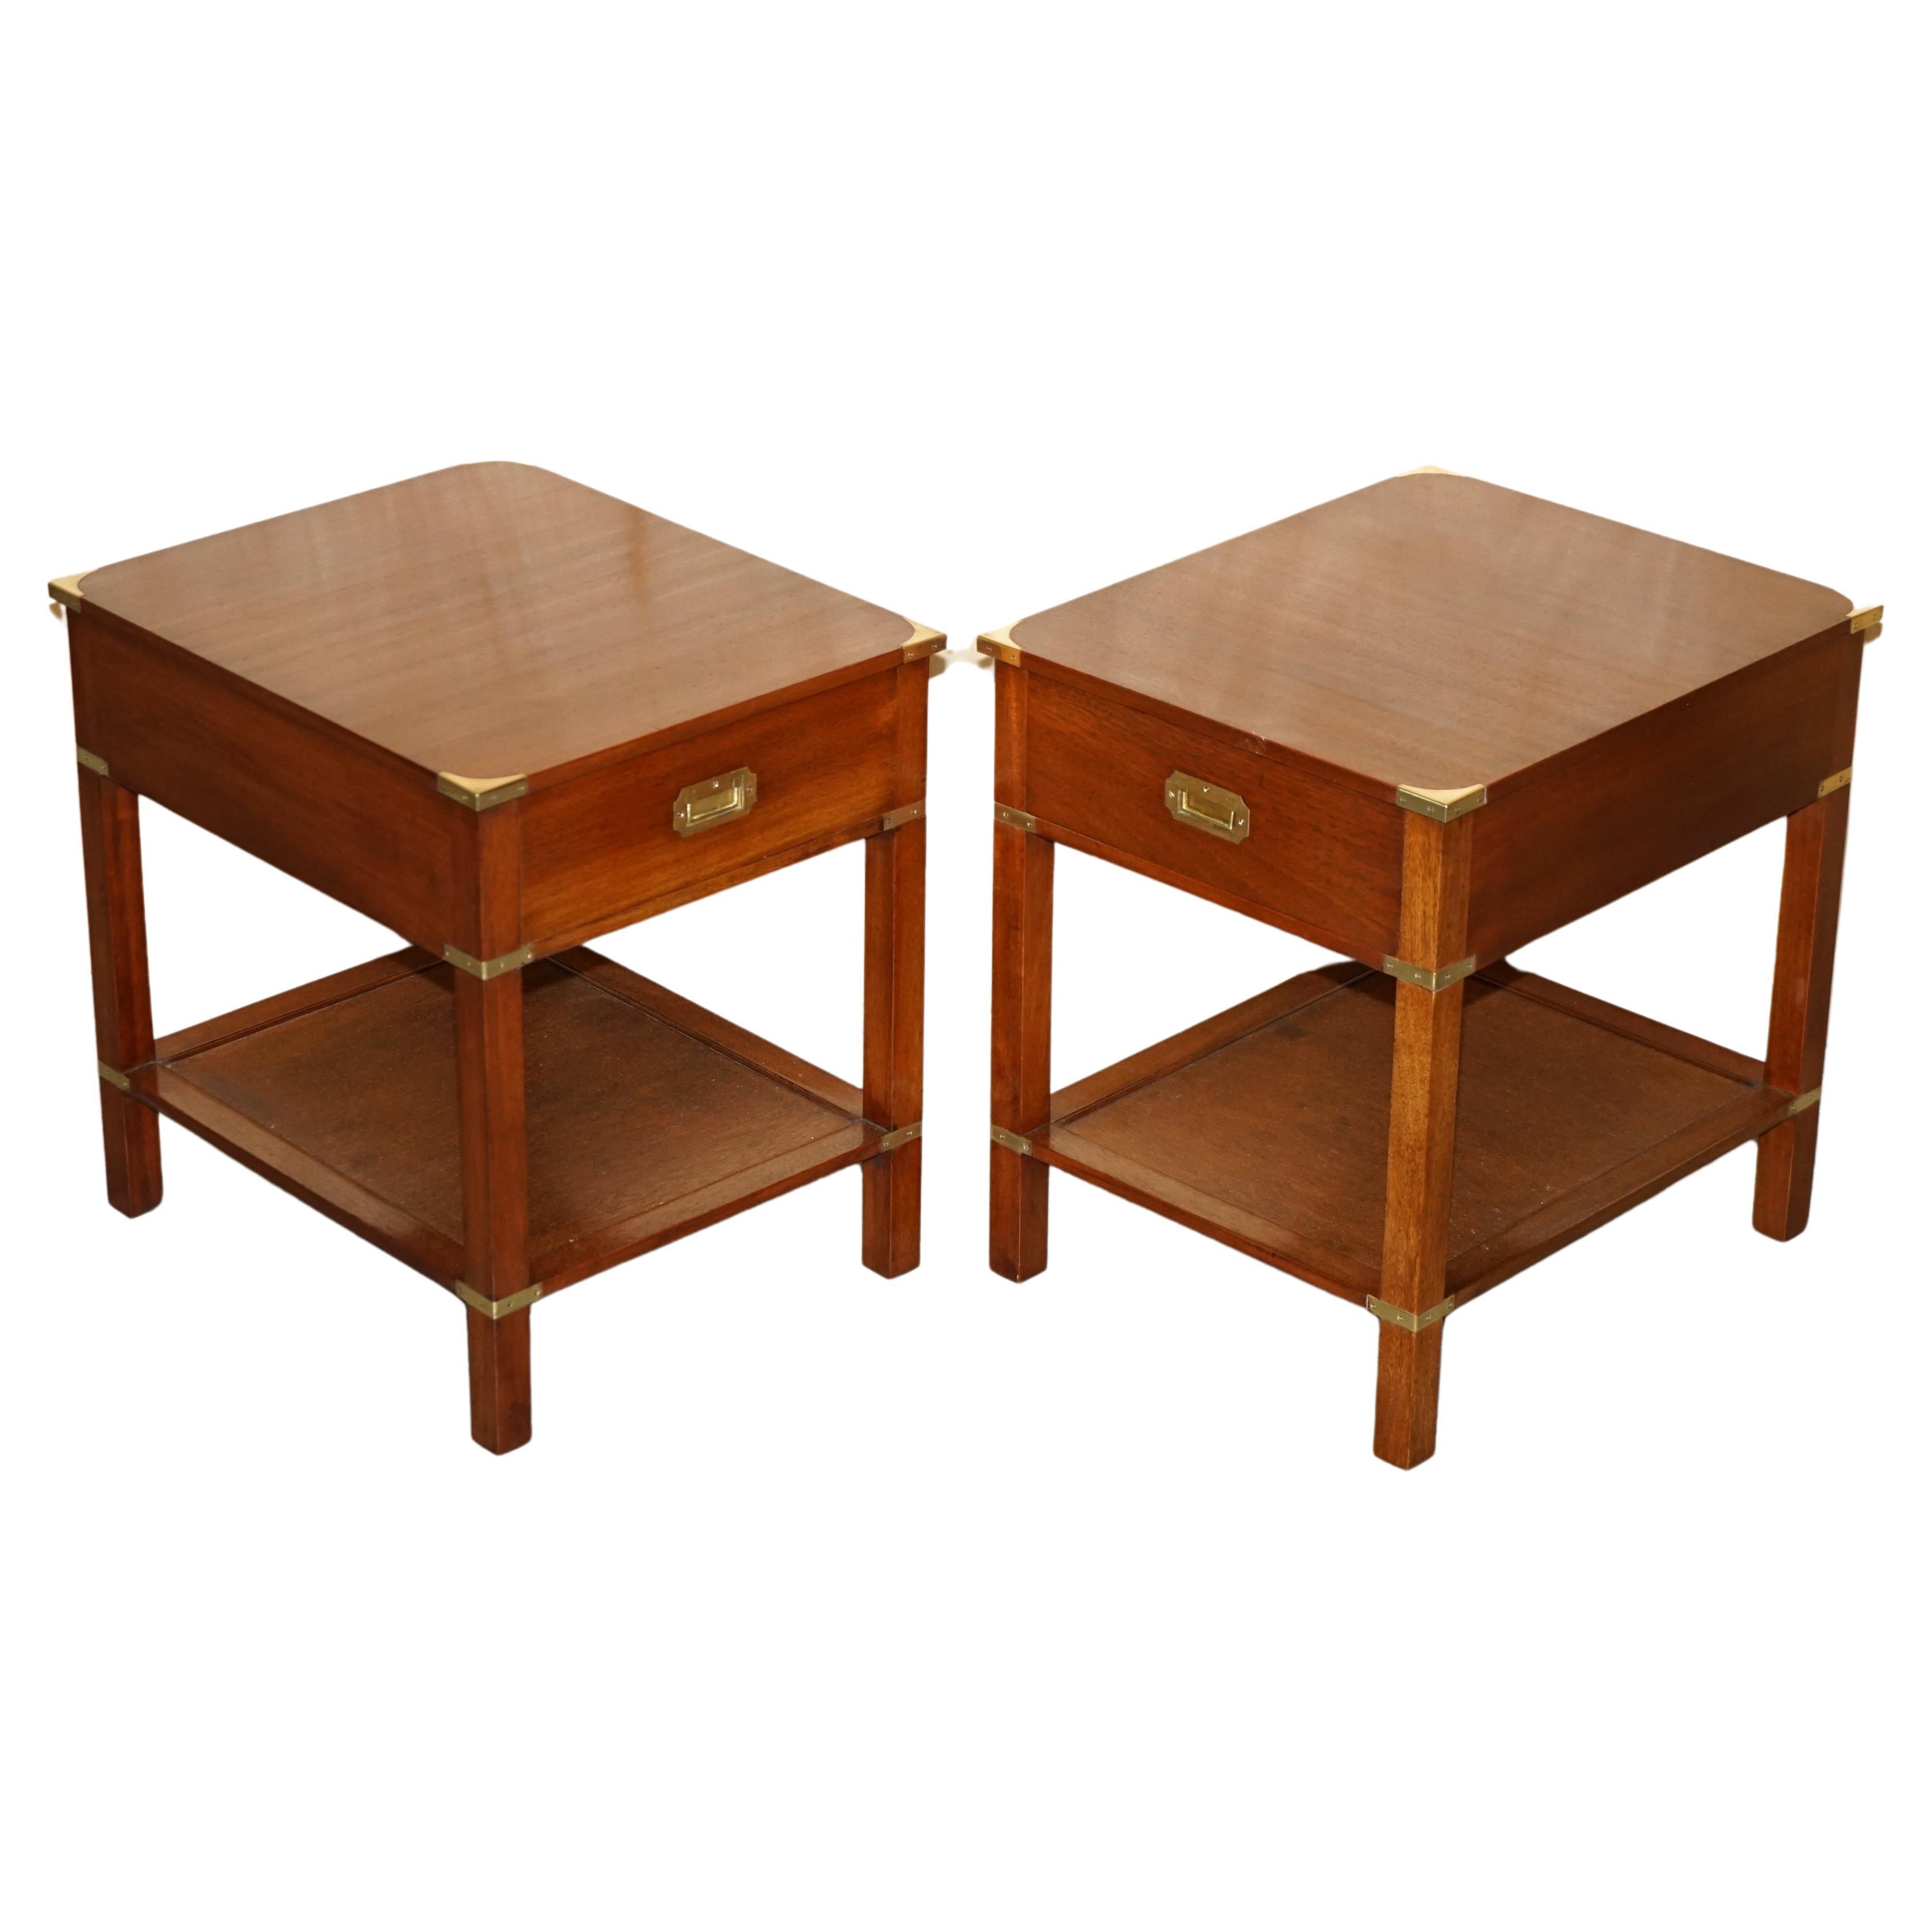 PAIR OF FULLY RESTORED HARRODS LONDON MiLITARY CAMPAIGN SINGLE DRAWER SIDE TABLE For Sale